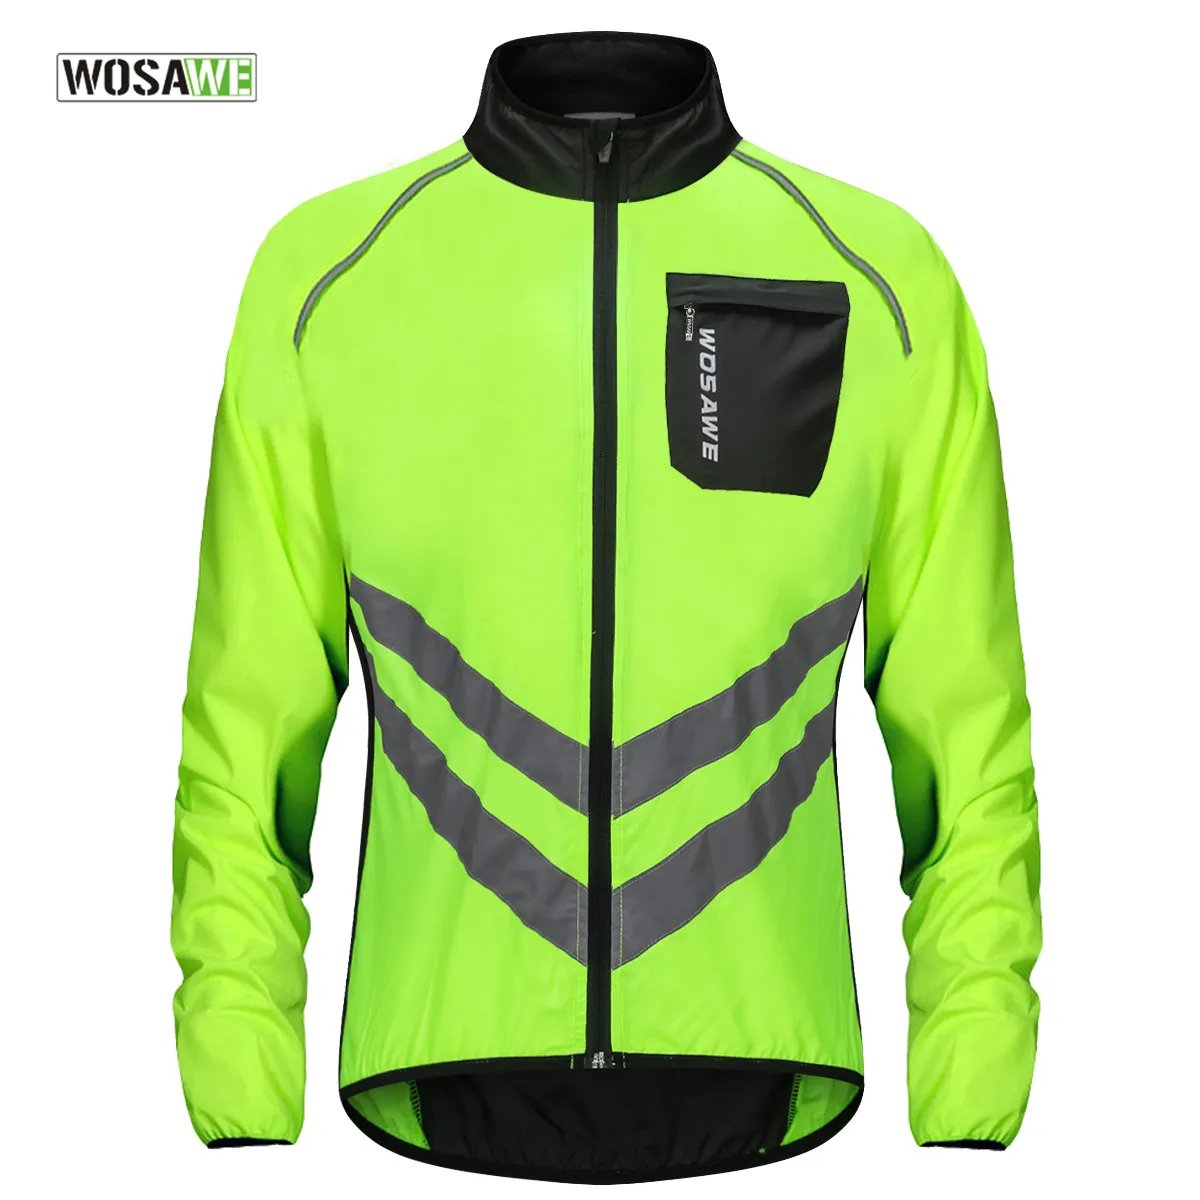 Mens Cycling Jackets Riding Jersey Bicycle Wind Coat Showerproof High Visibility 